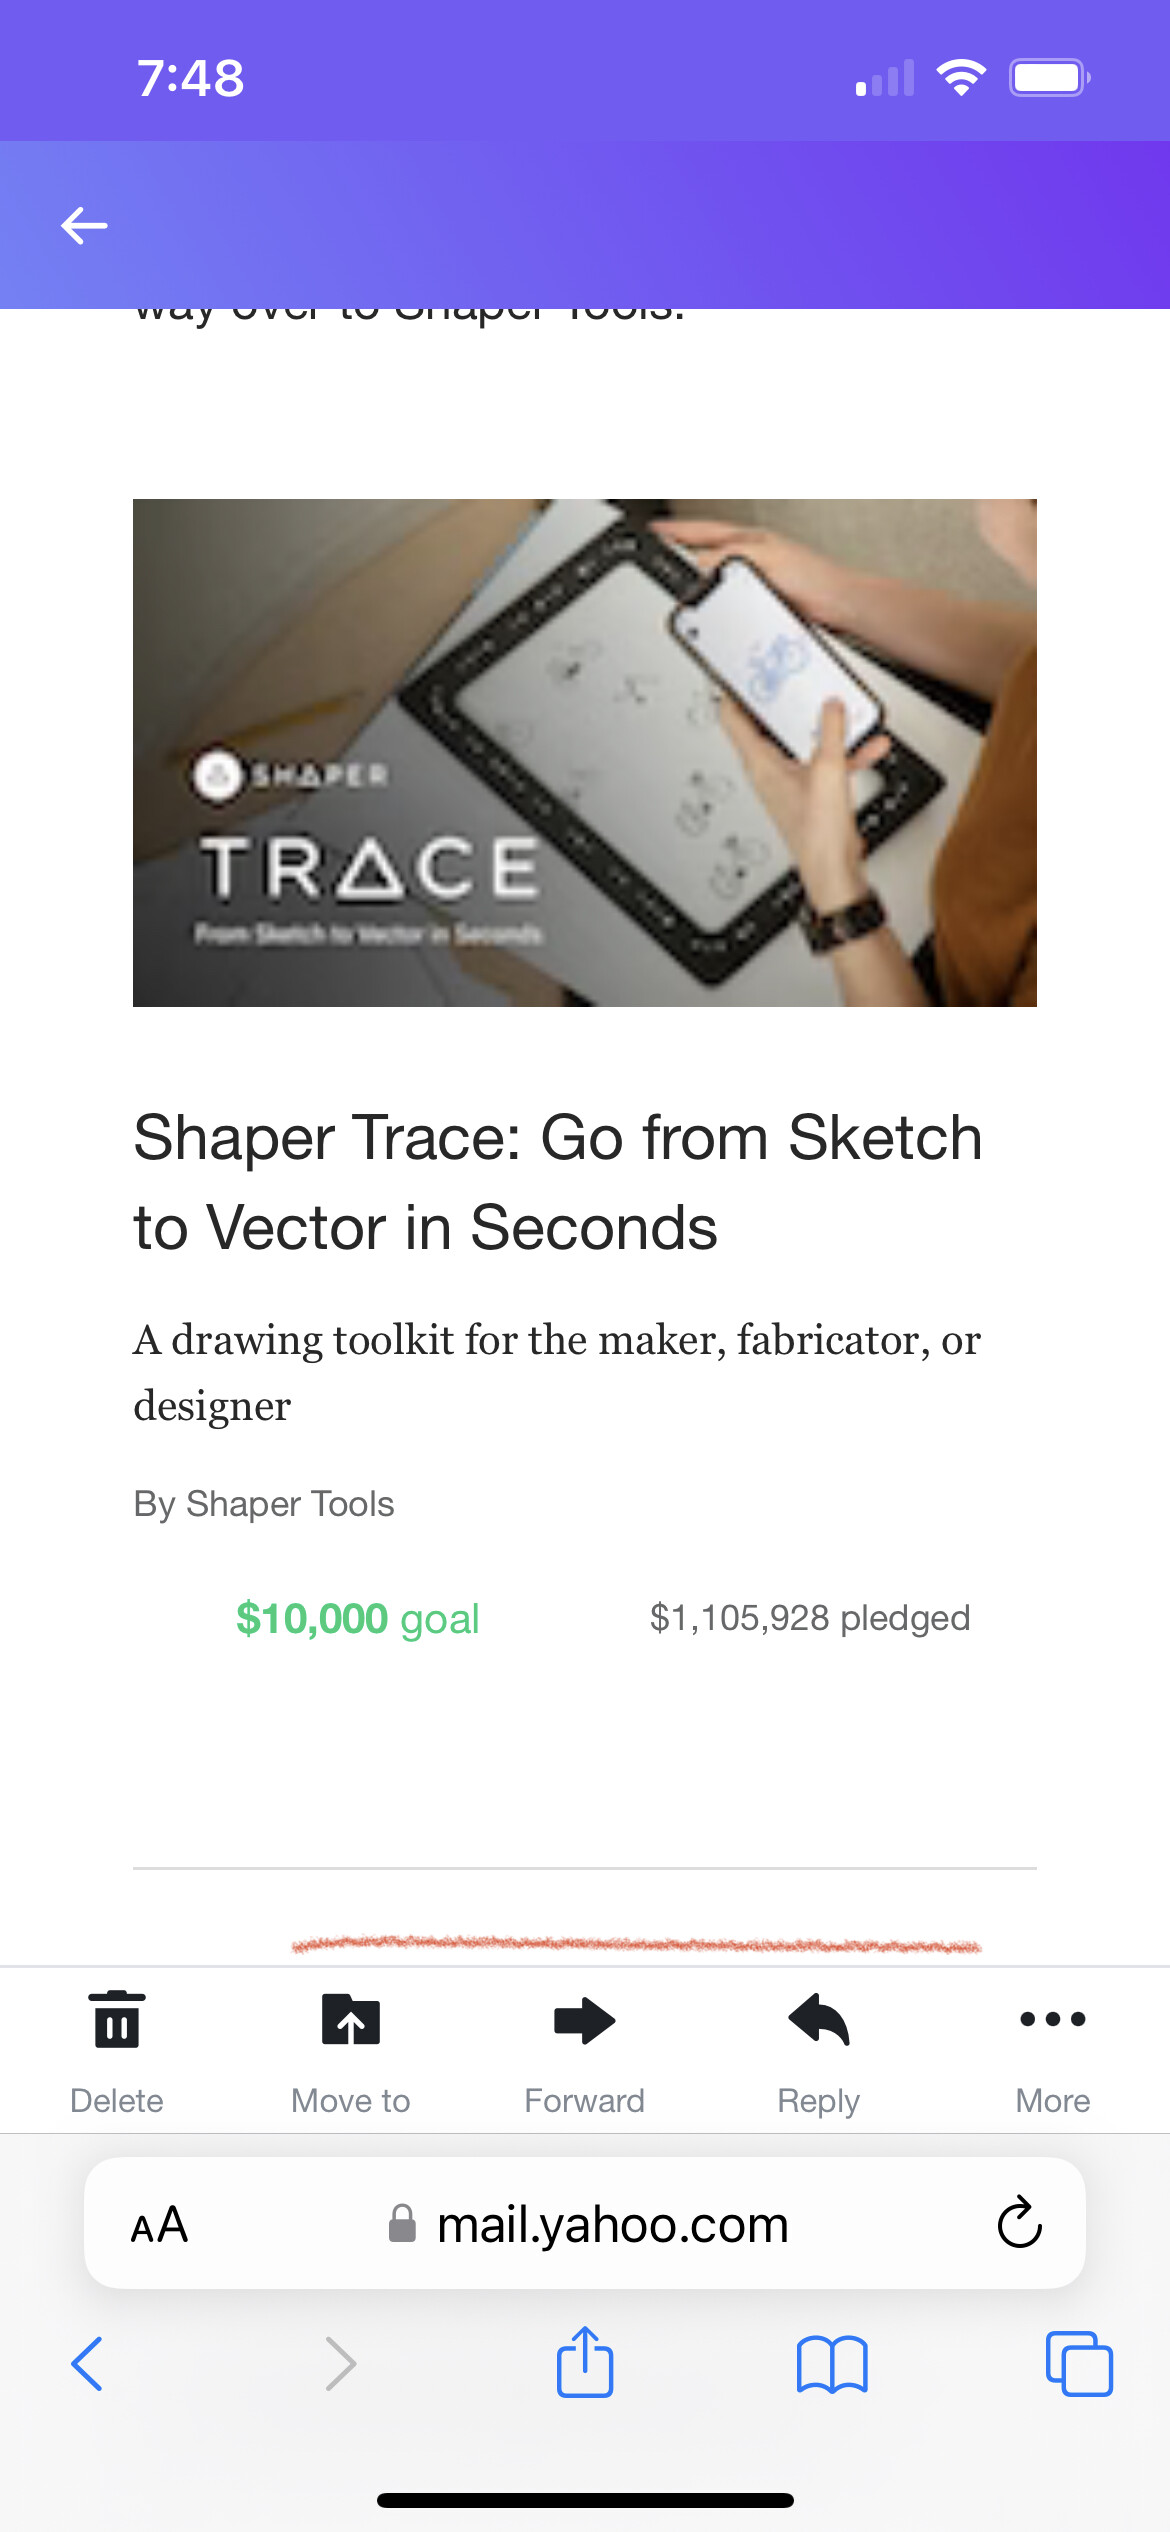 Shaper Trace review: sketch to vector in seconds, is it too good